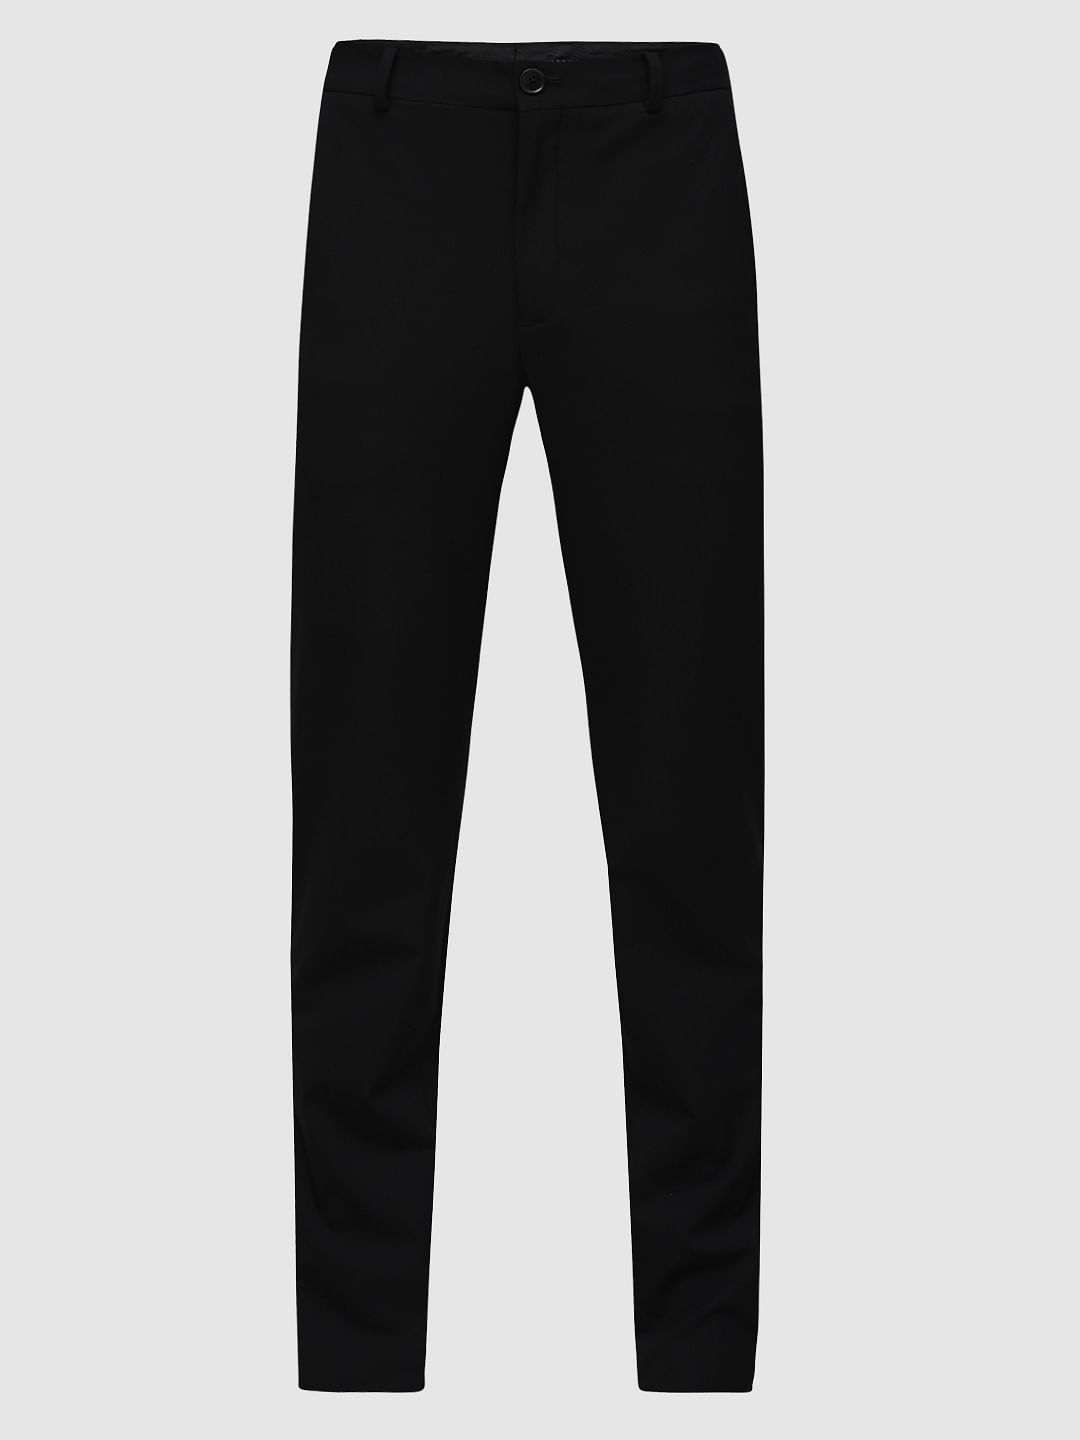 Buy COVER STORY Black Tailored Trousers with Belt (Set of 2) online